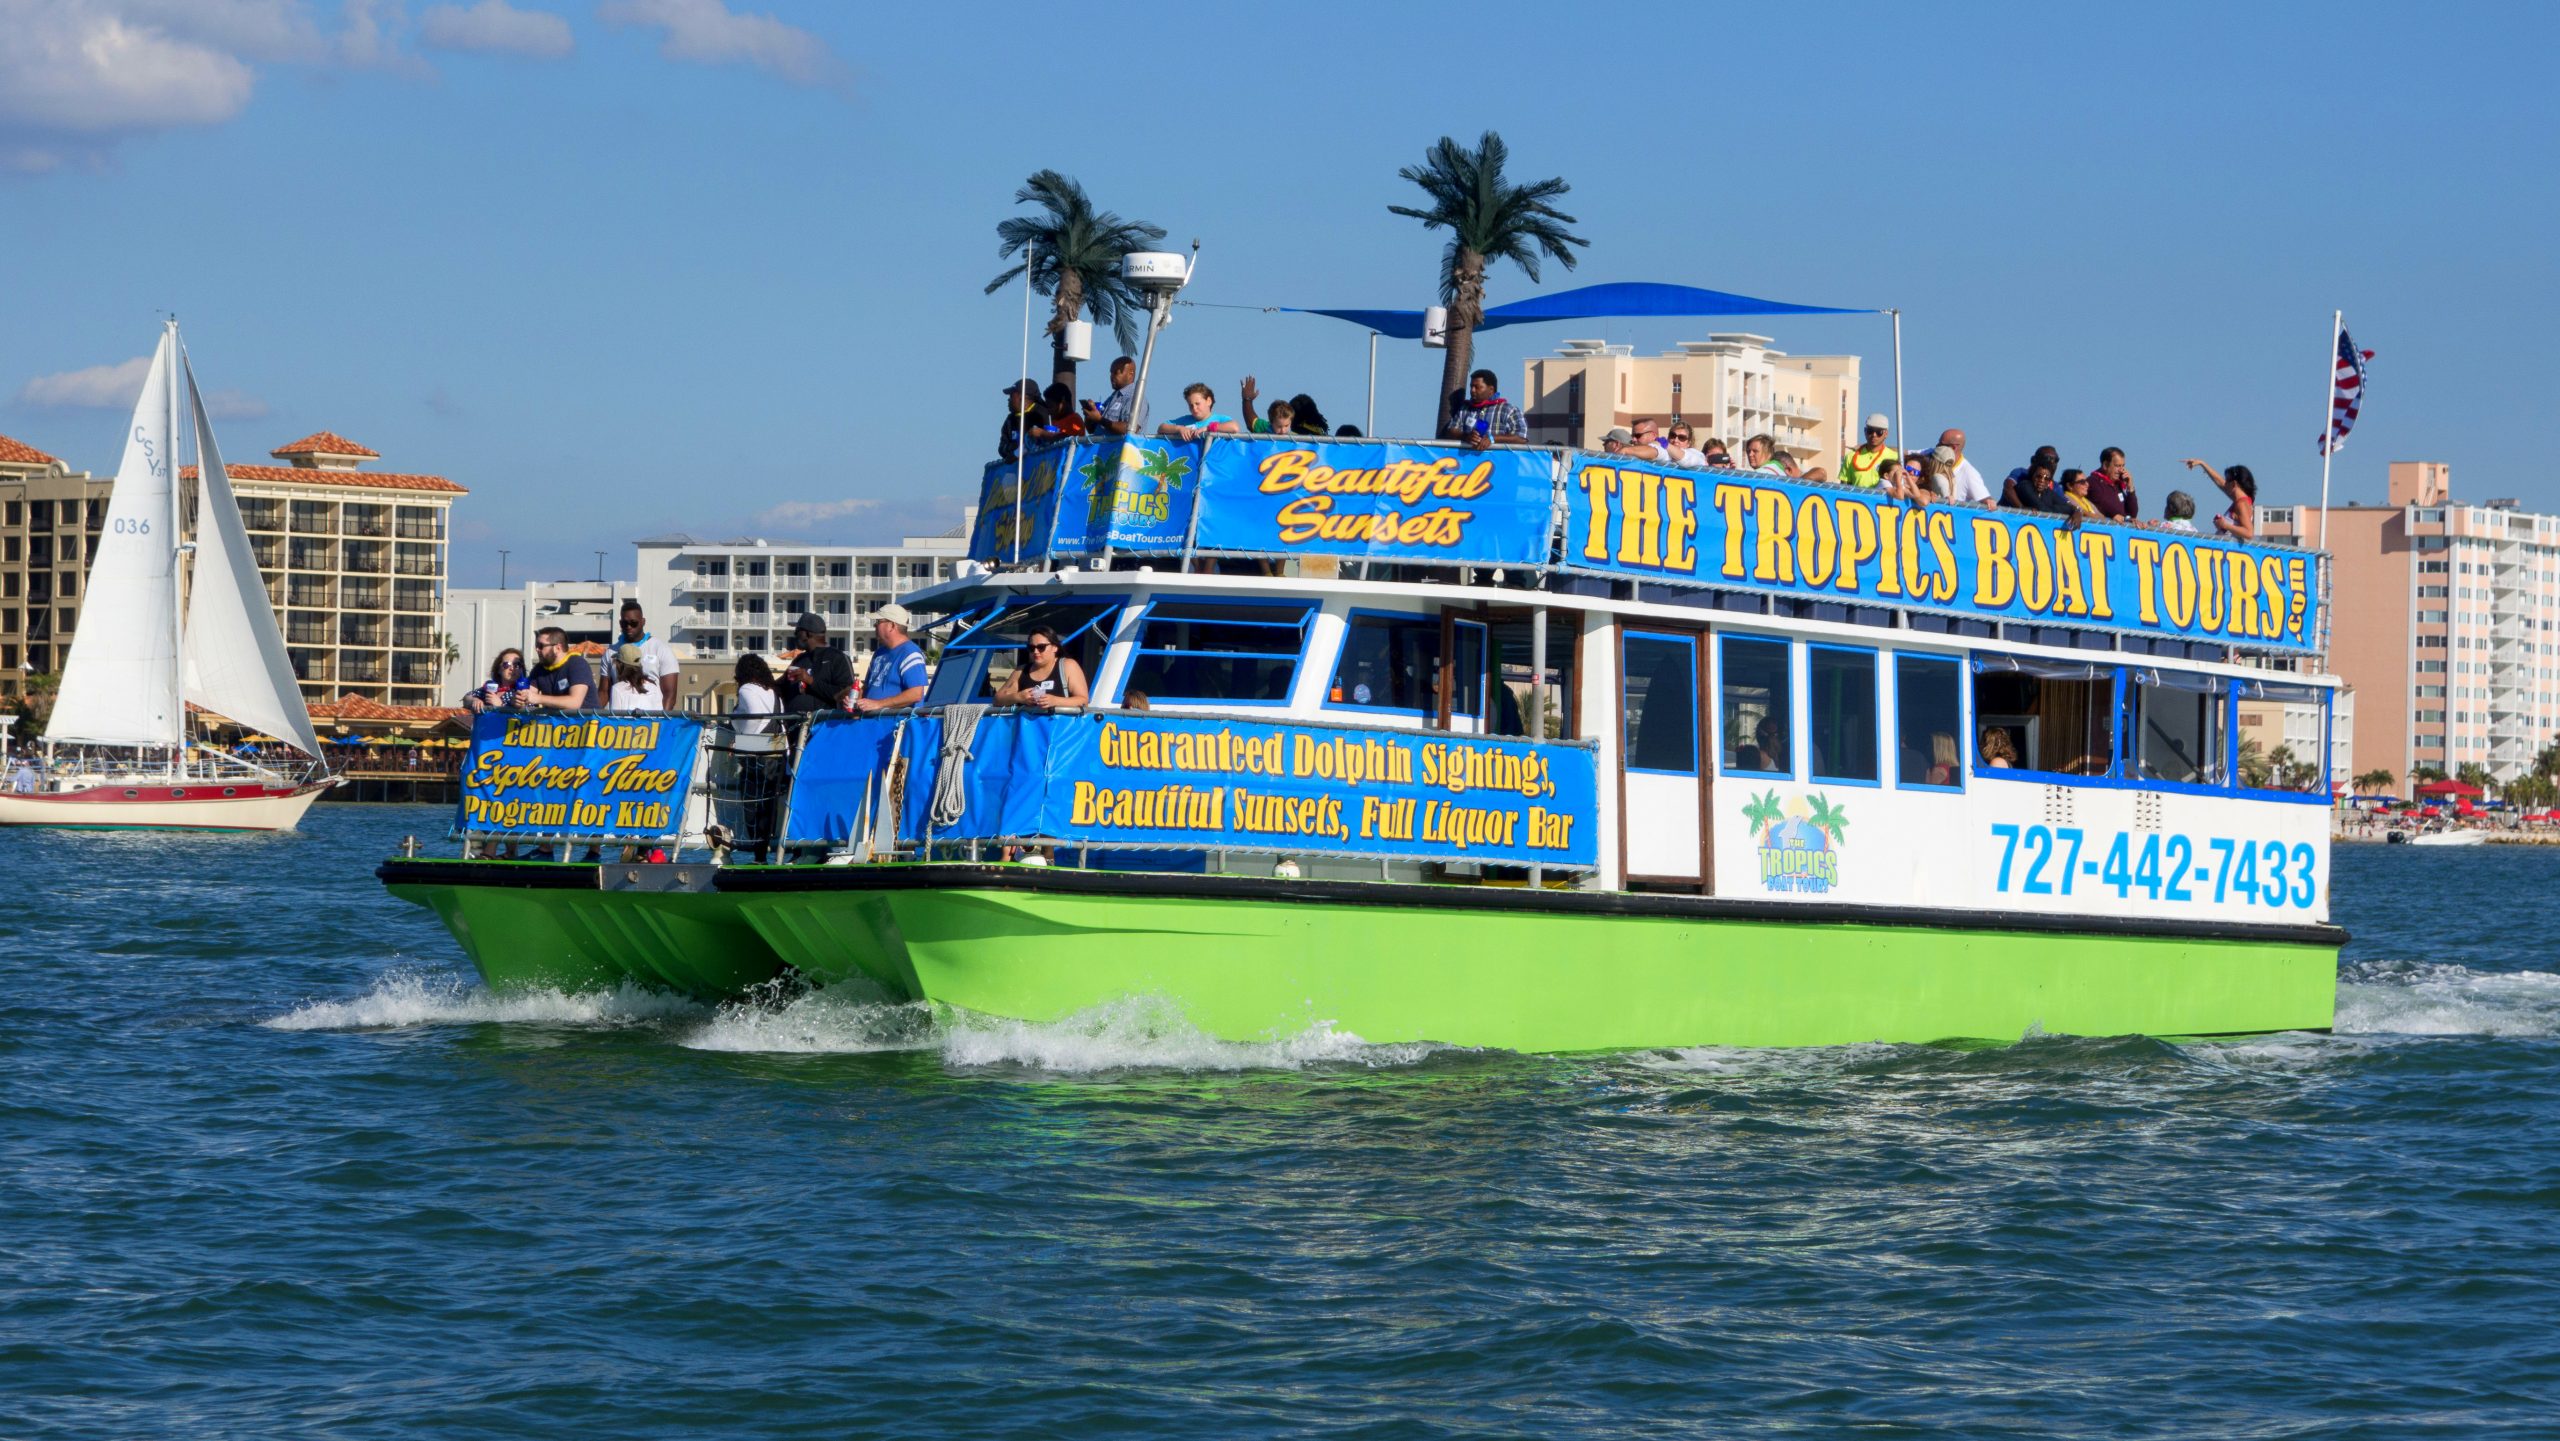 the tropics boat tours promotion code